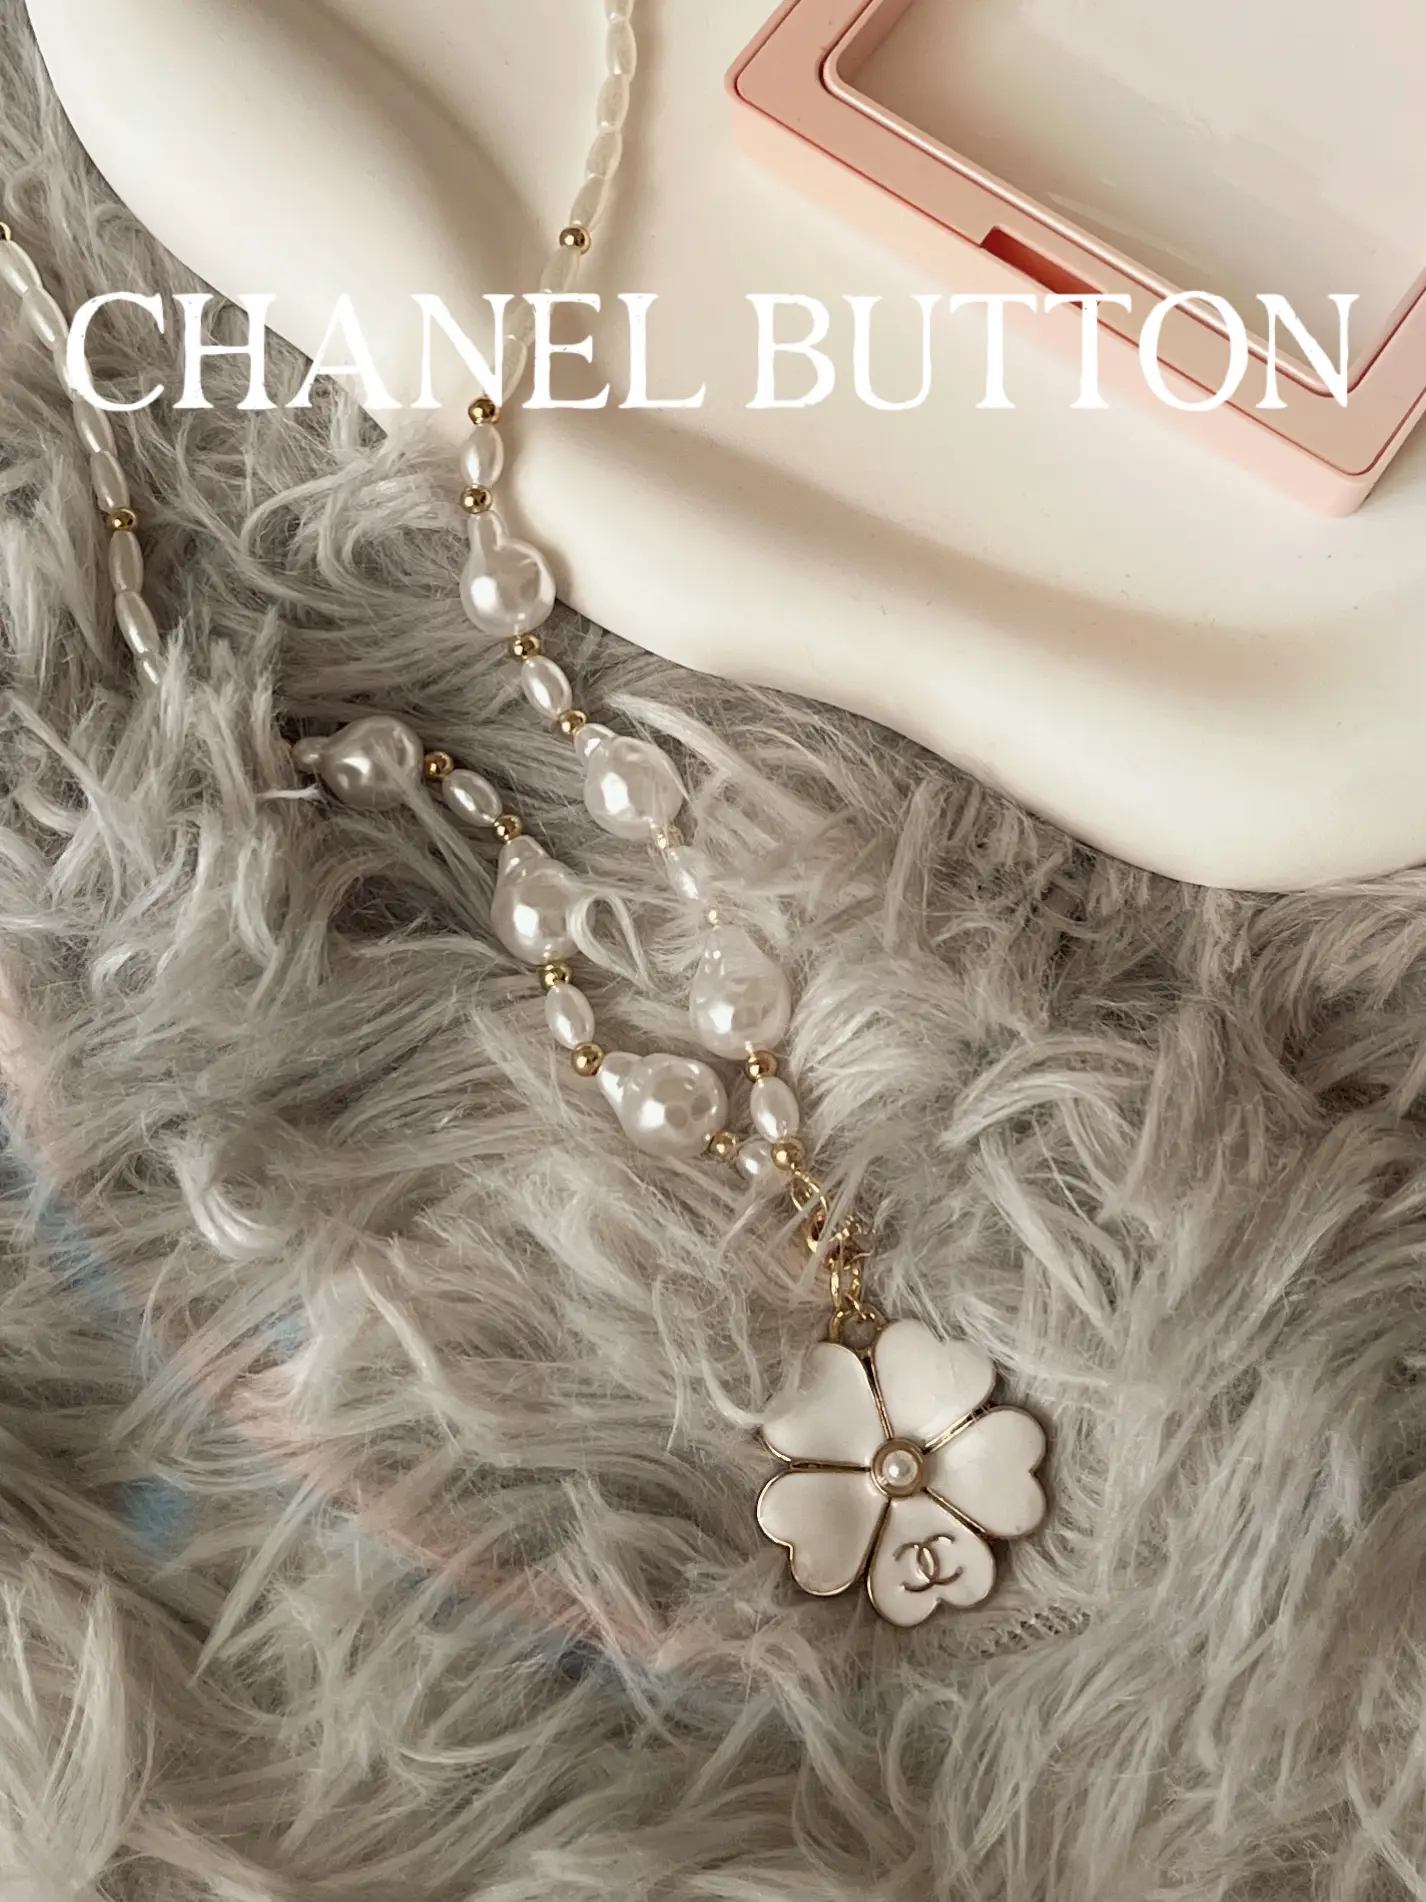 Is Chanel Jewelry really worth it ?